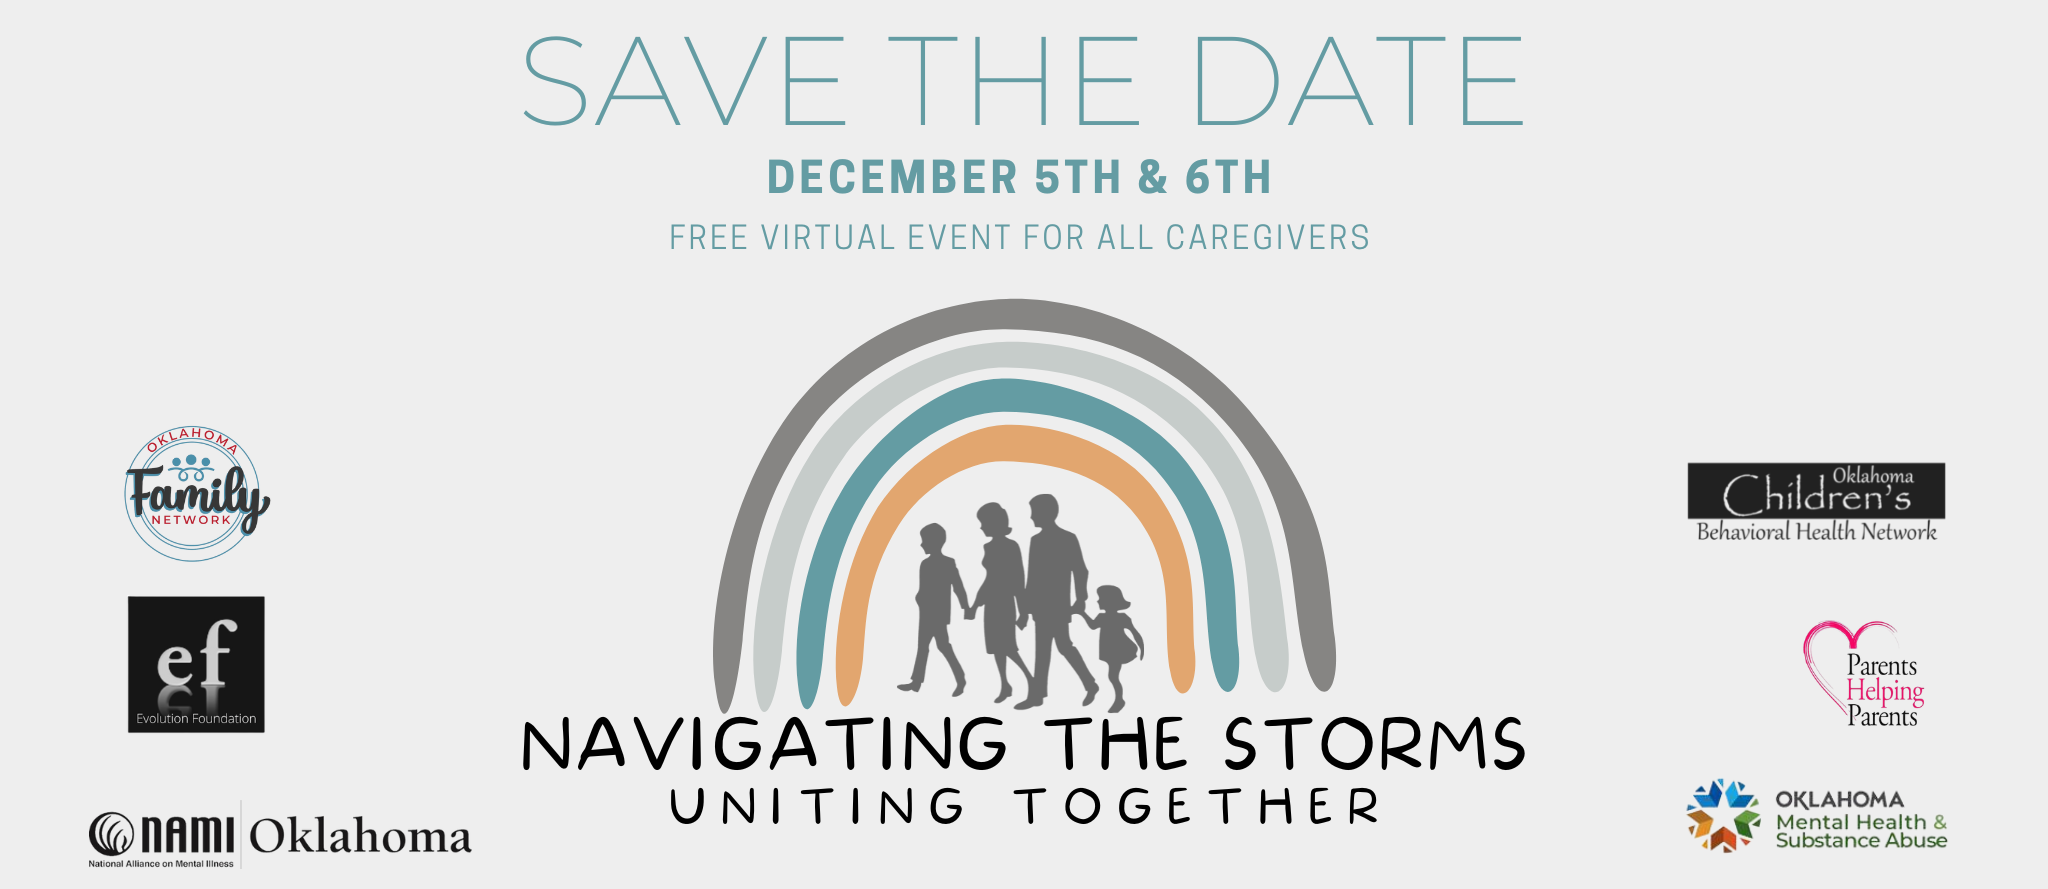 Save the Date for Navigating the storms, uniting together